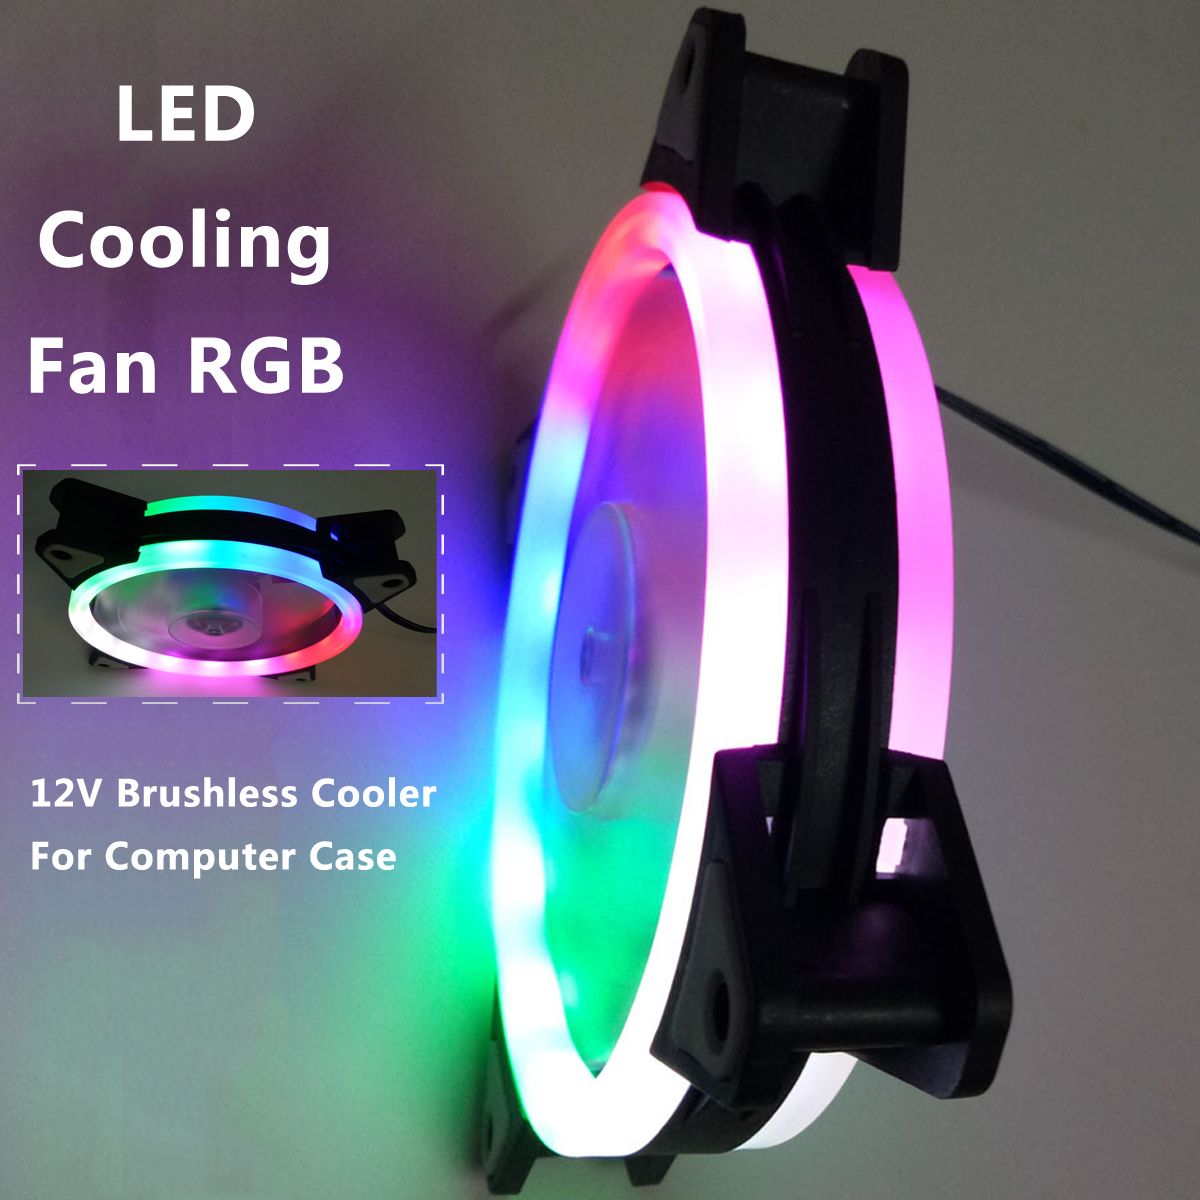 3Pin-4Pin-LED-RGB-Cooling-Fan-120mm-DC-12V-Brushless-PC-Cooler-For-Computer-Case-1388485